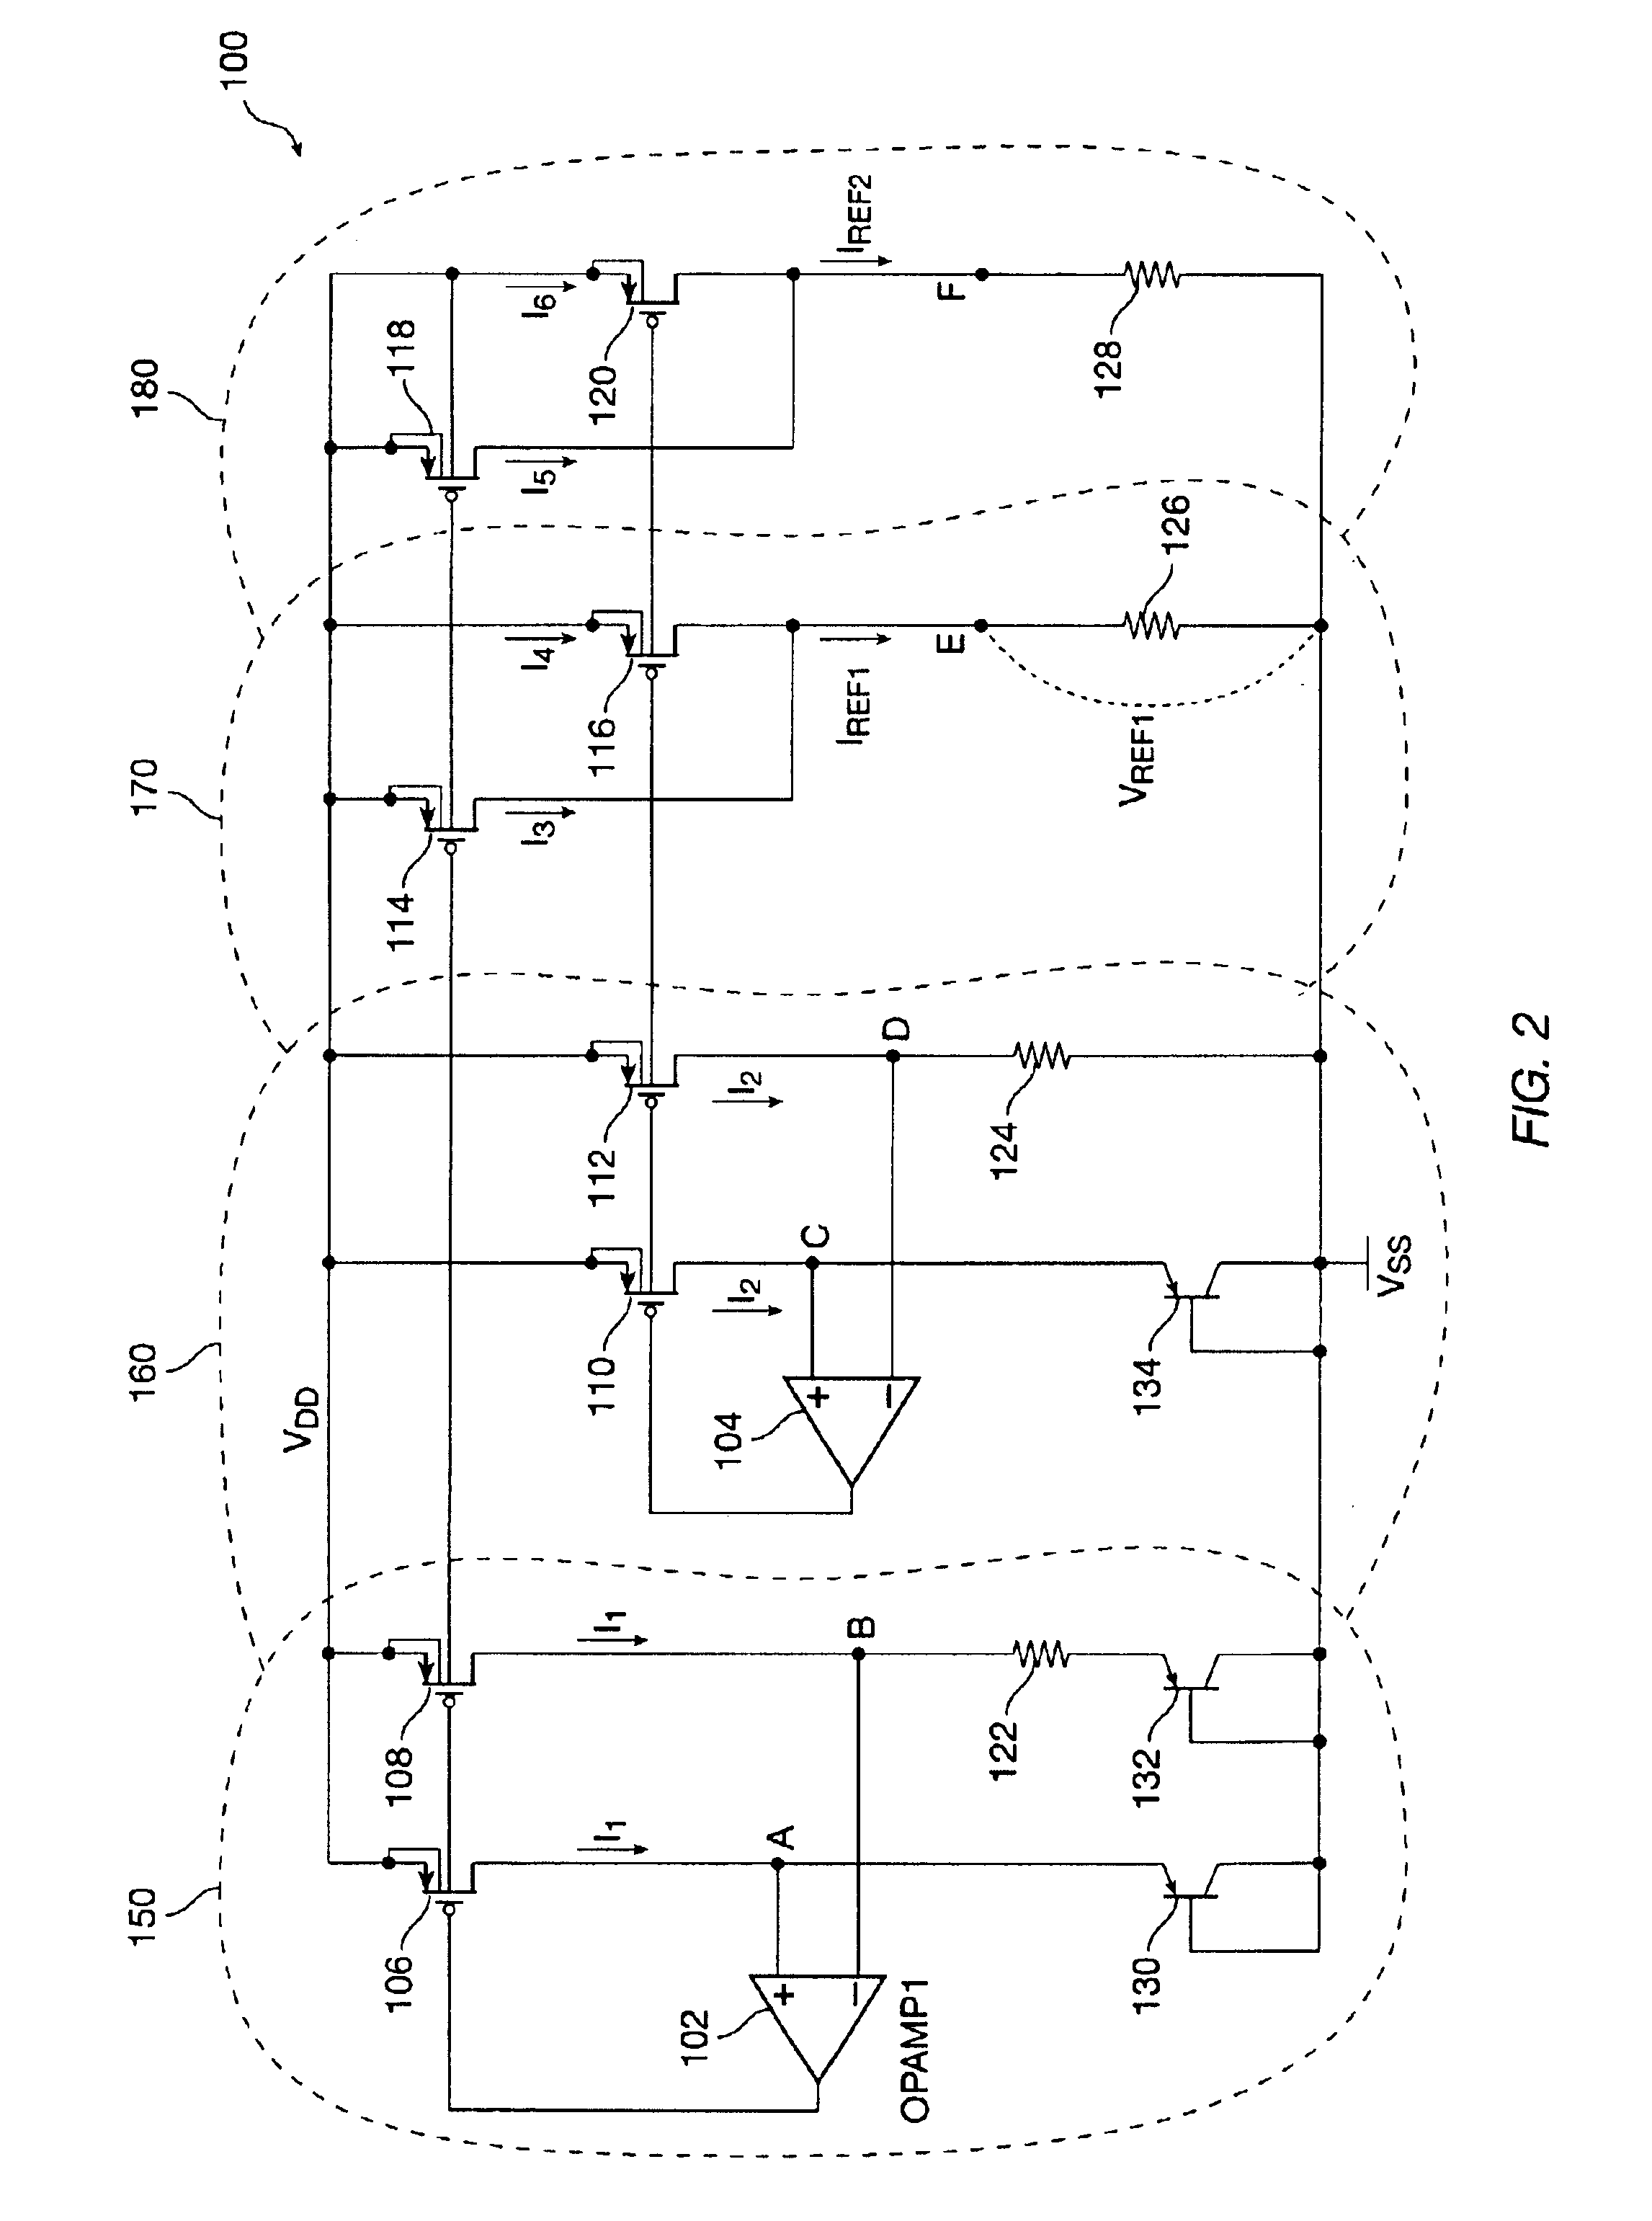 CMOS bandgap reference with low voltage operation